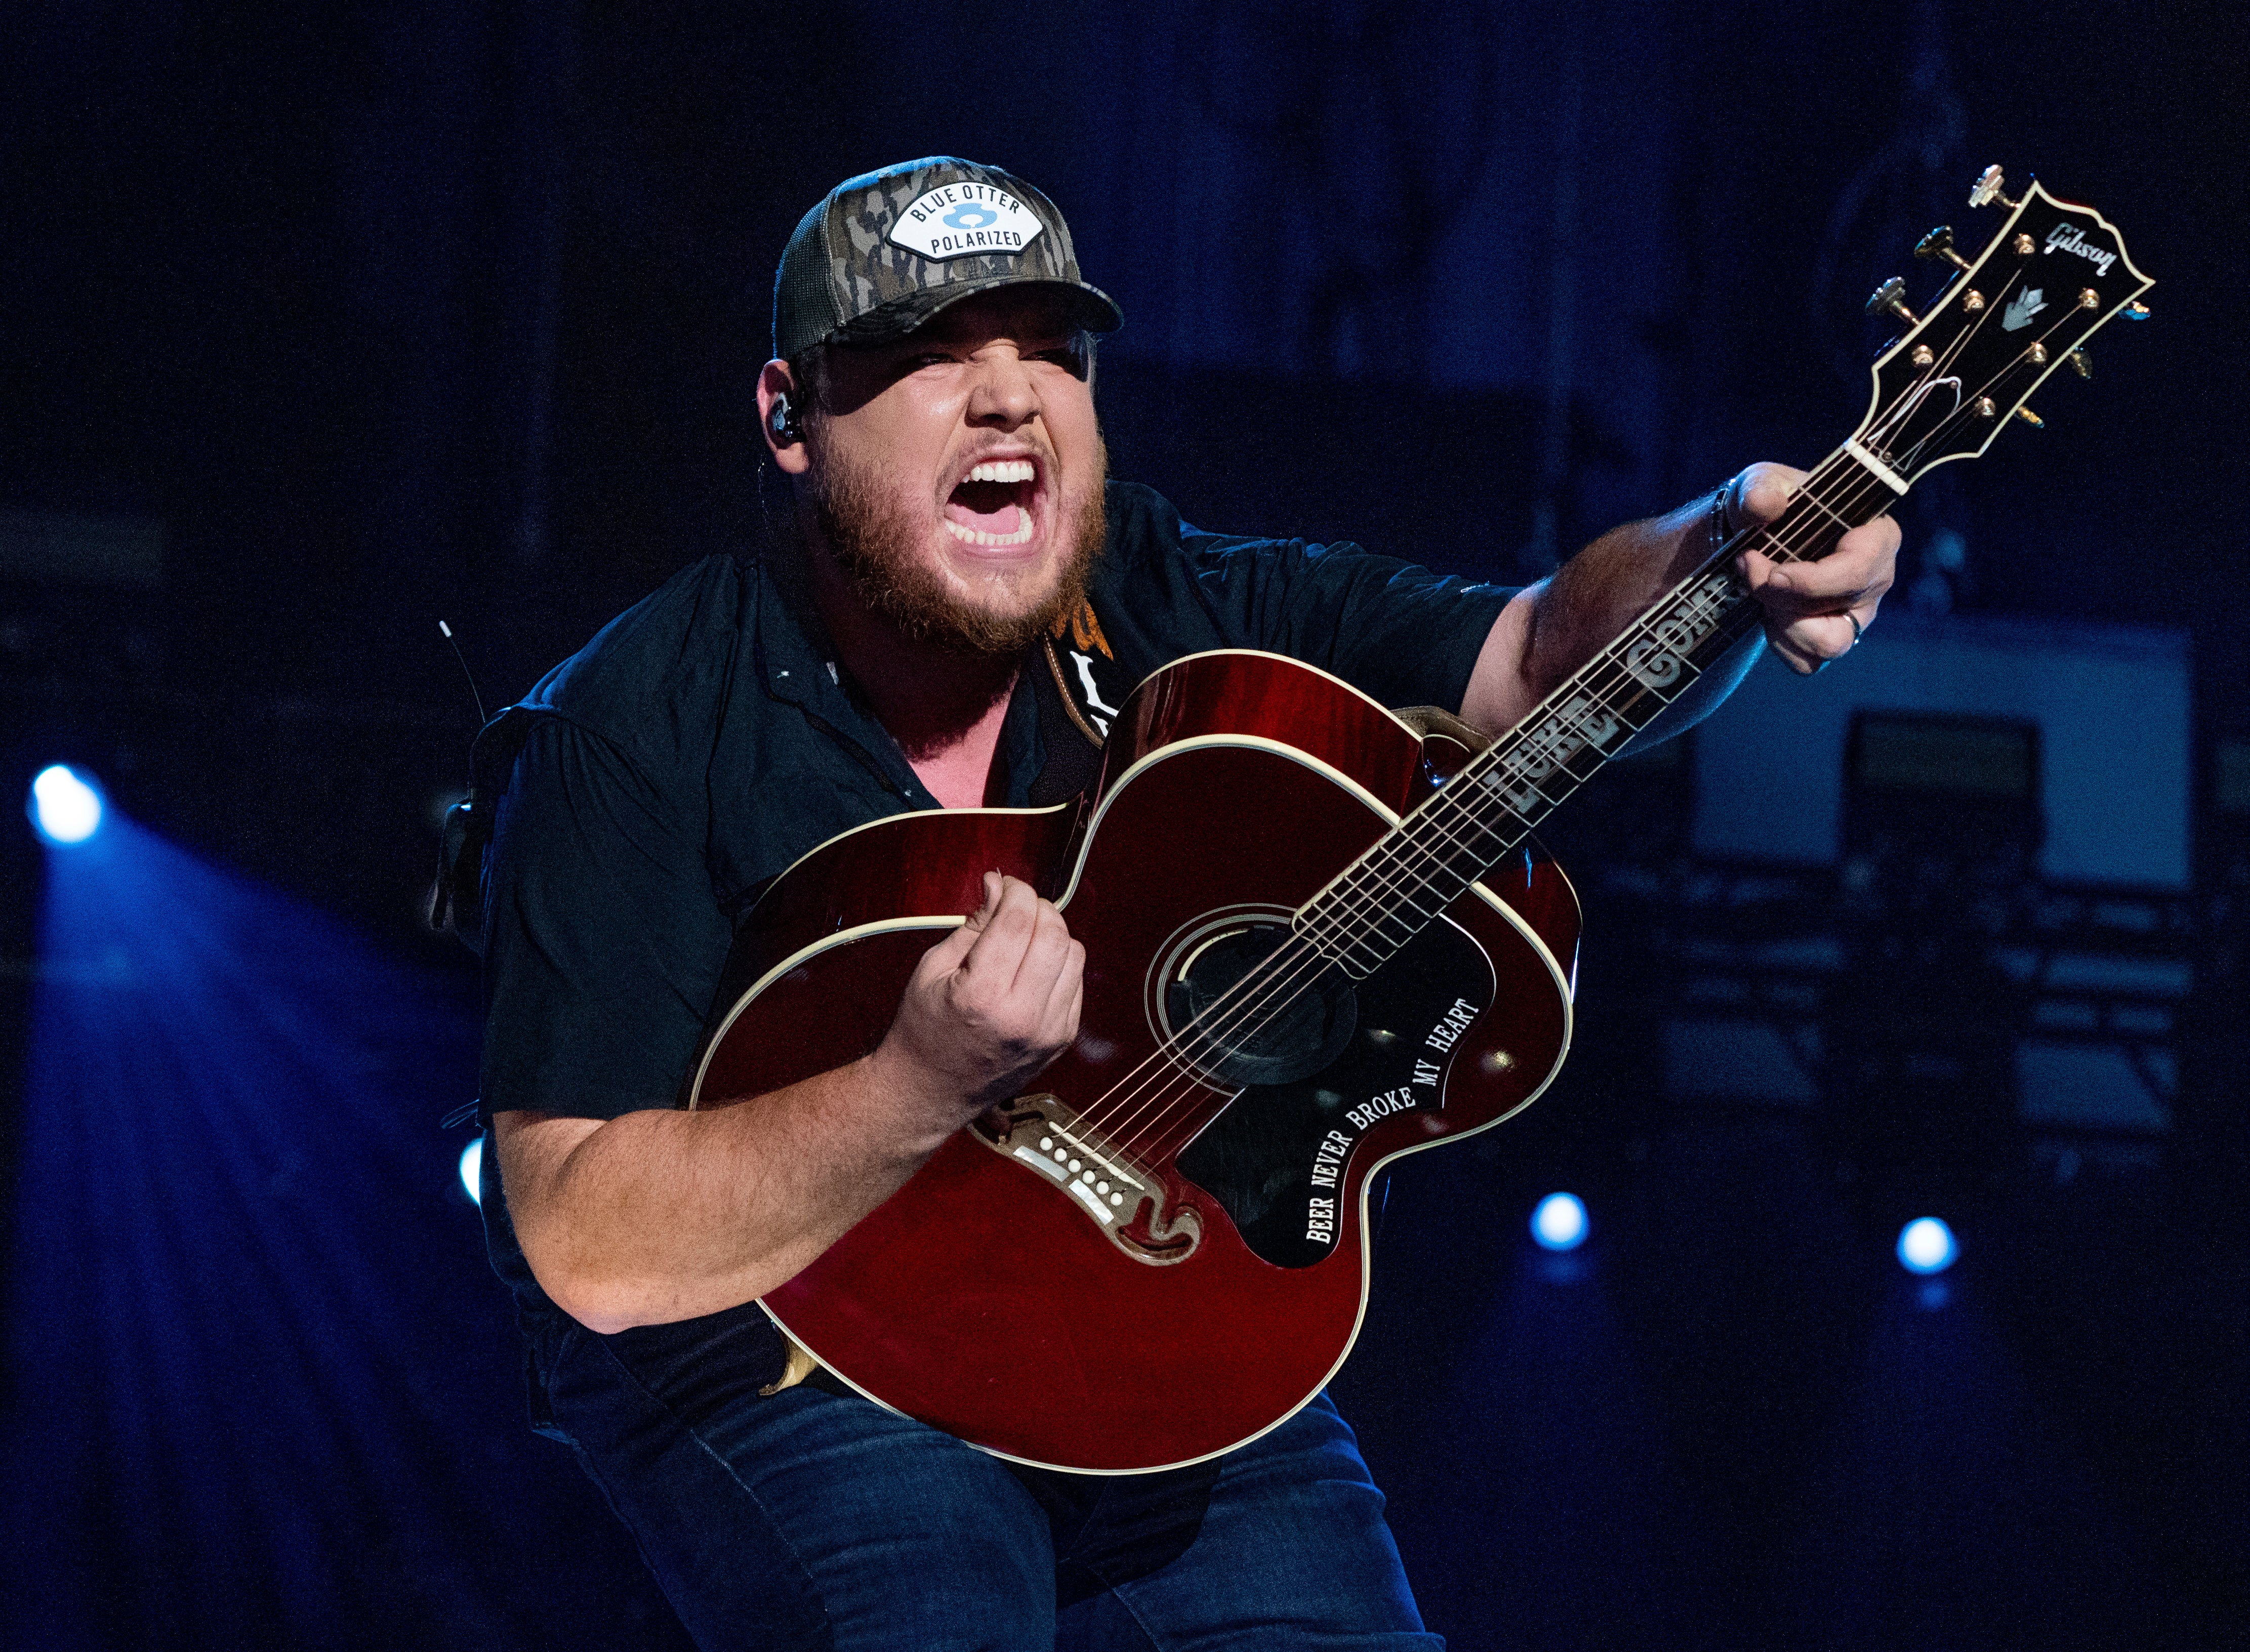 Luke Combs despaired over the tension in the country music scene